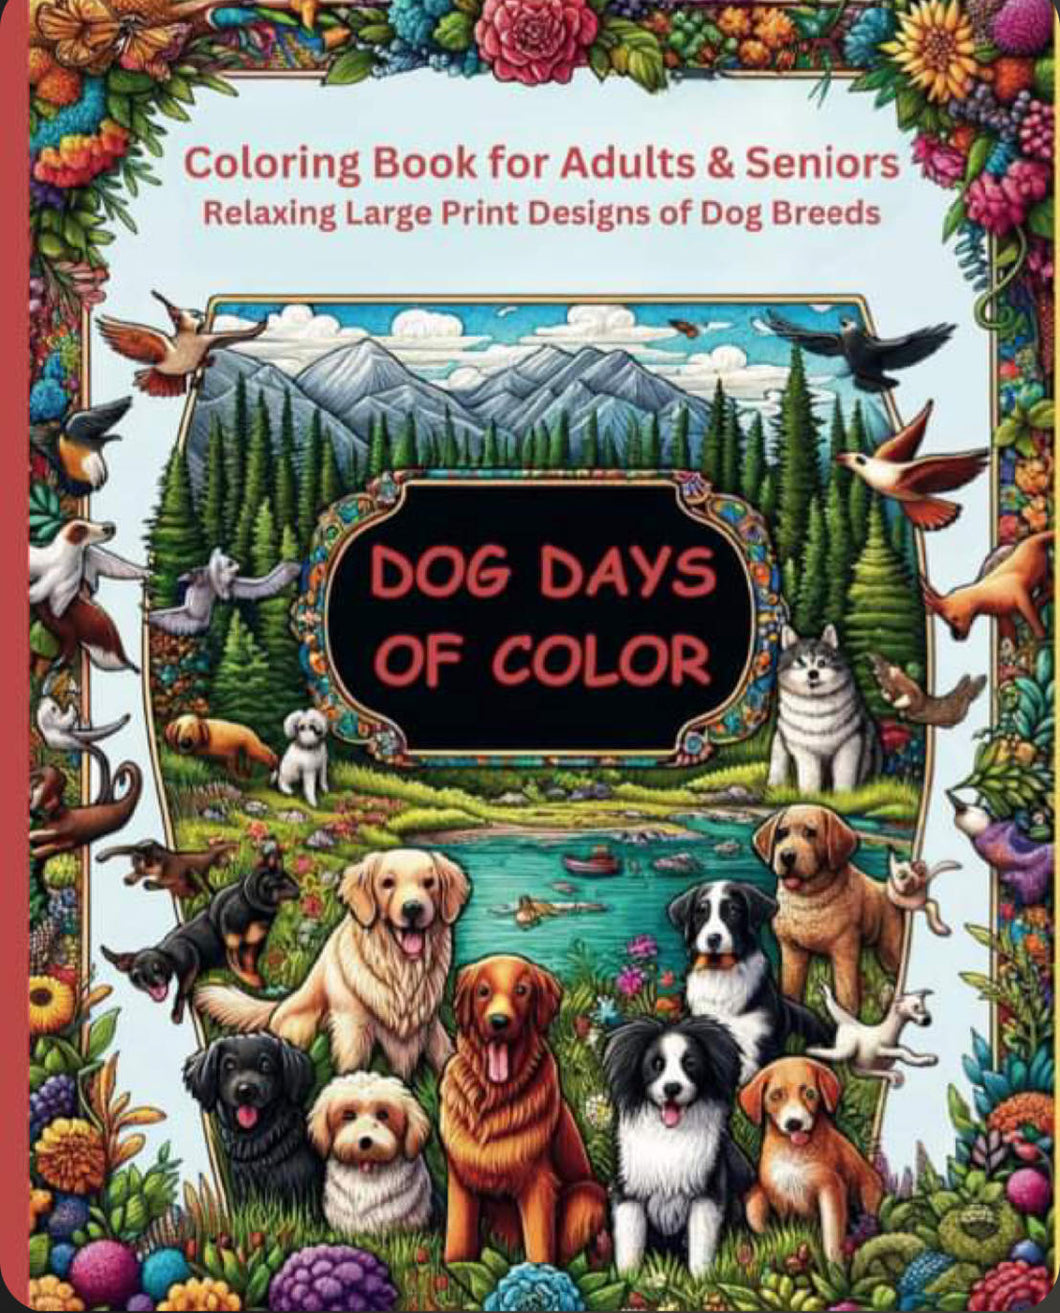 Dog Days of Color: Relaxing Large Print Designs of Dog Breeds Coloring Book for Adults and Seniors